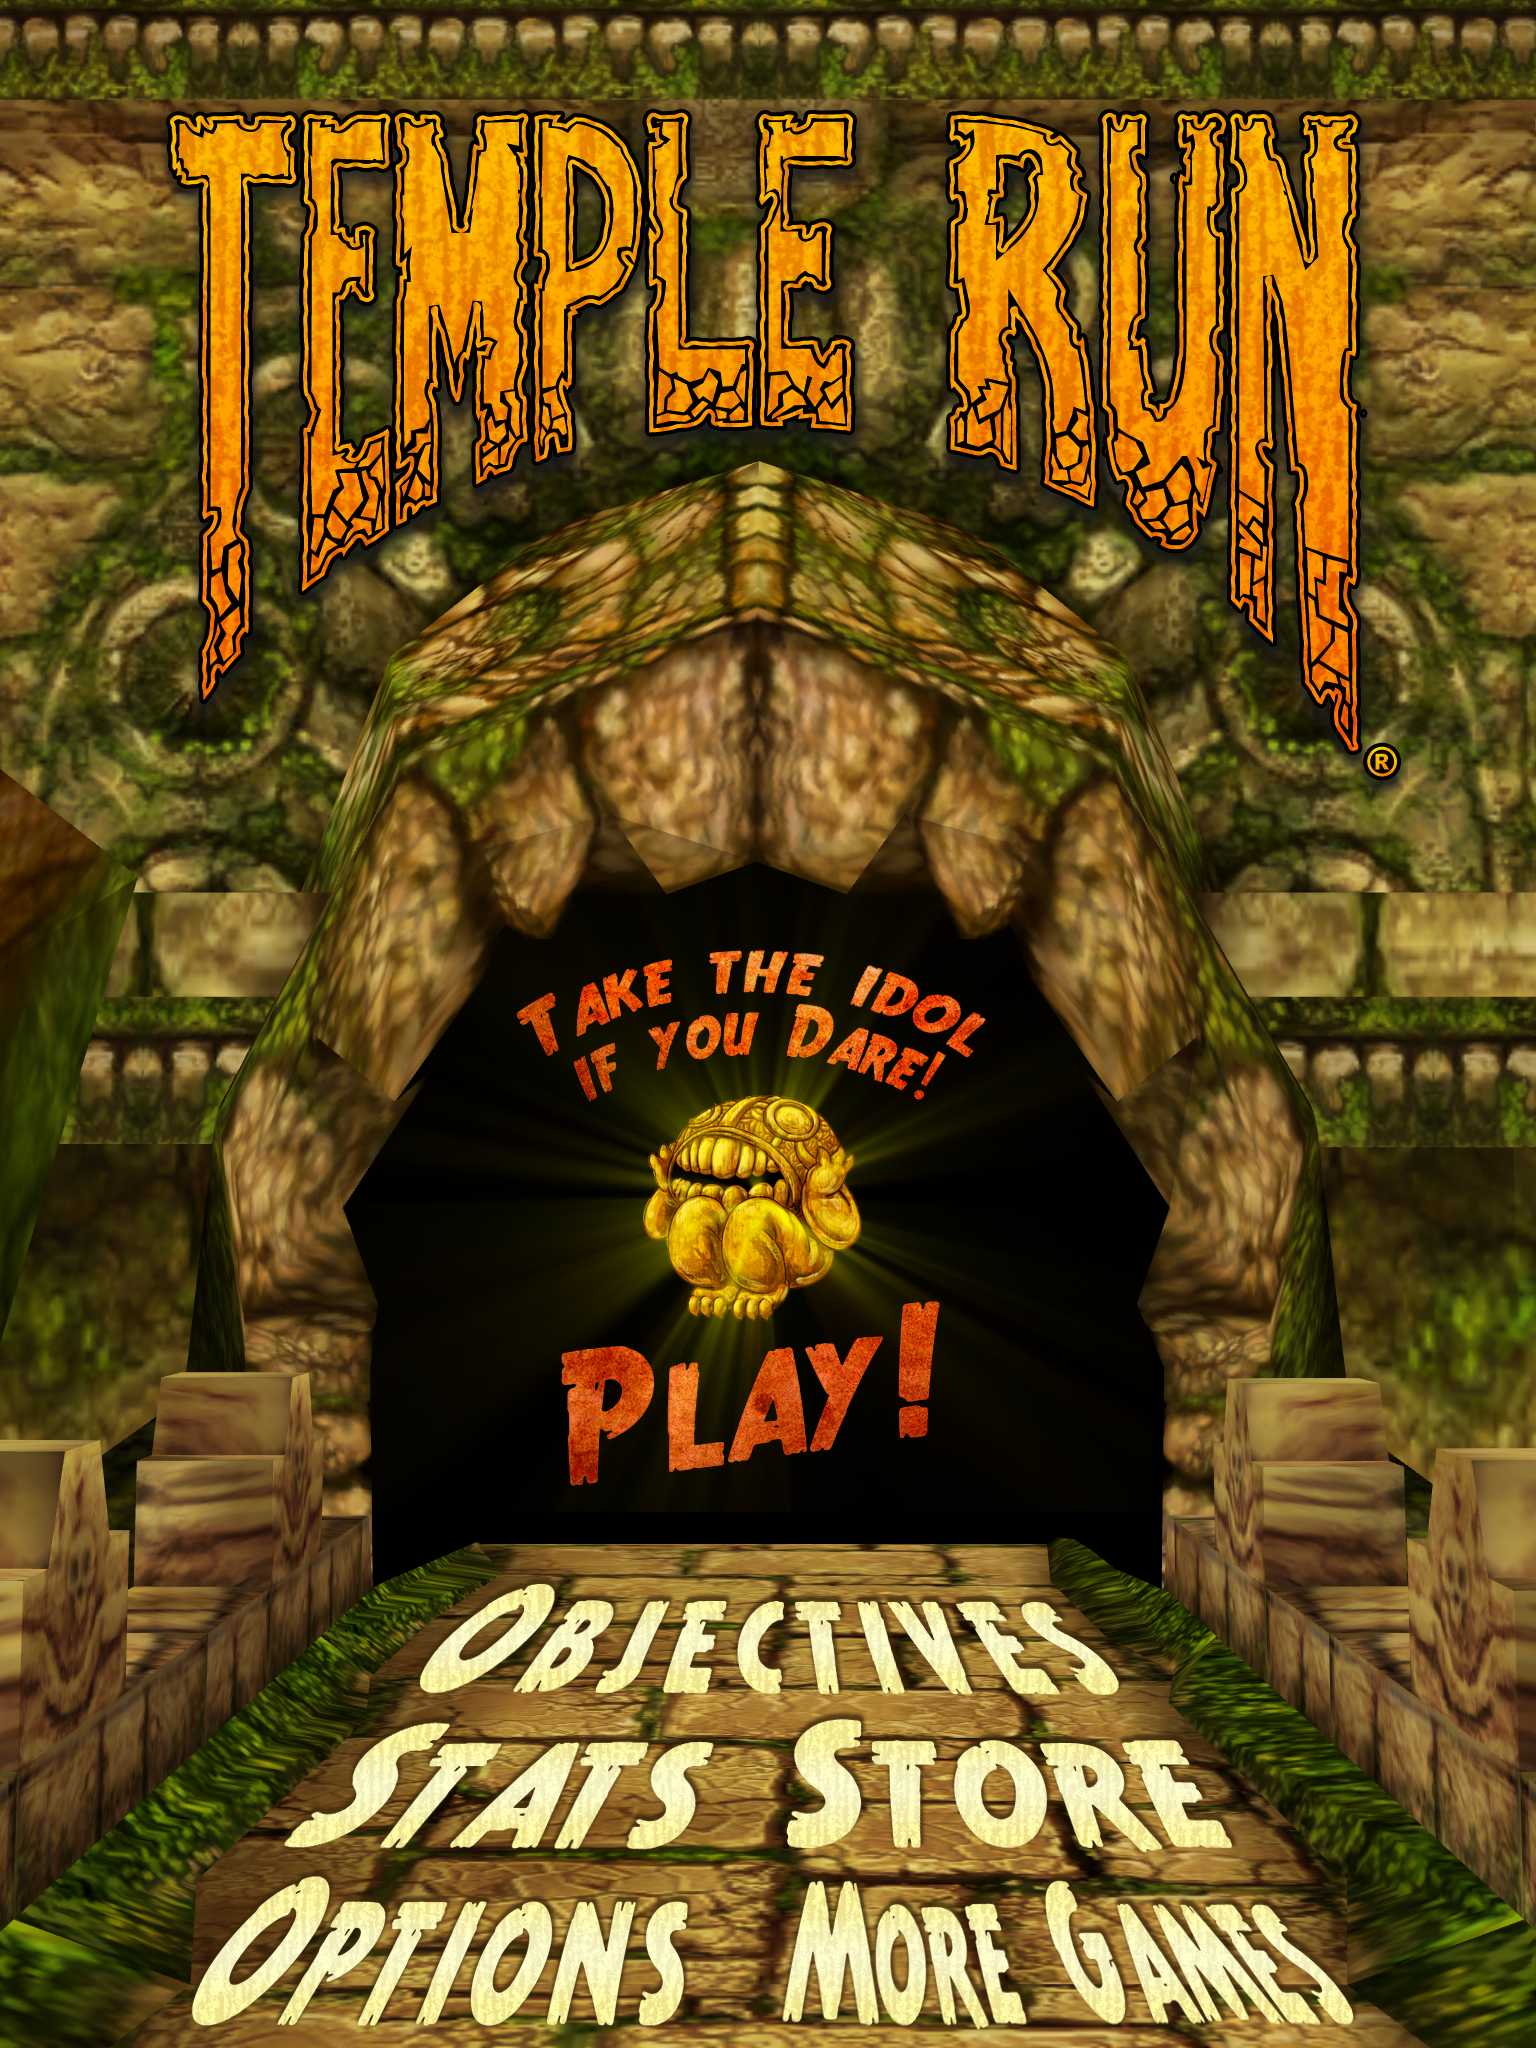 Temple Run 2 vs Temple Endless Run 3 Android Gameplay 